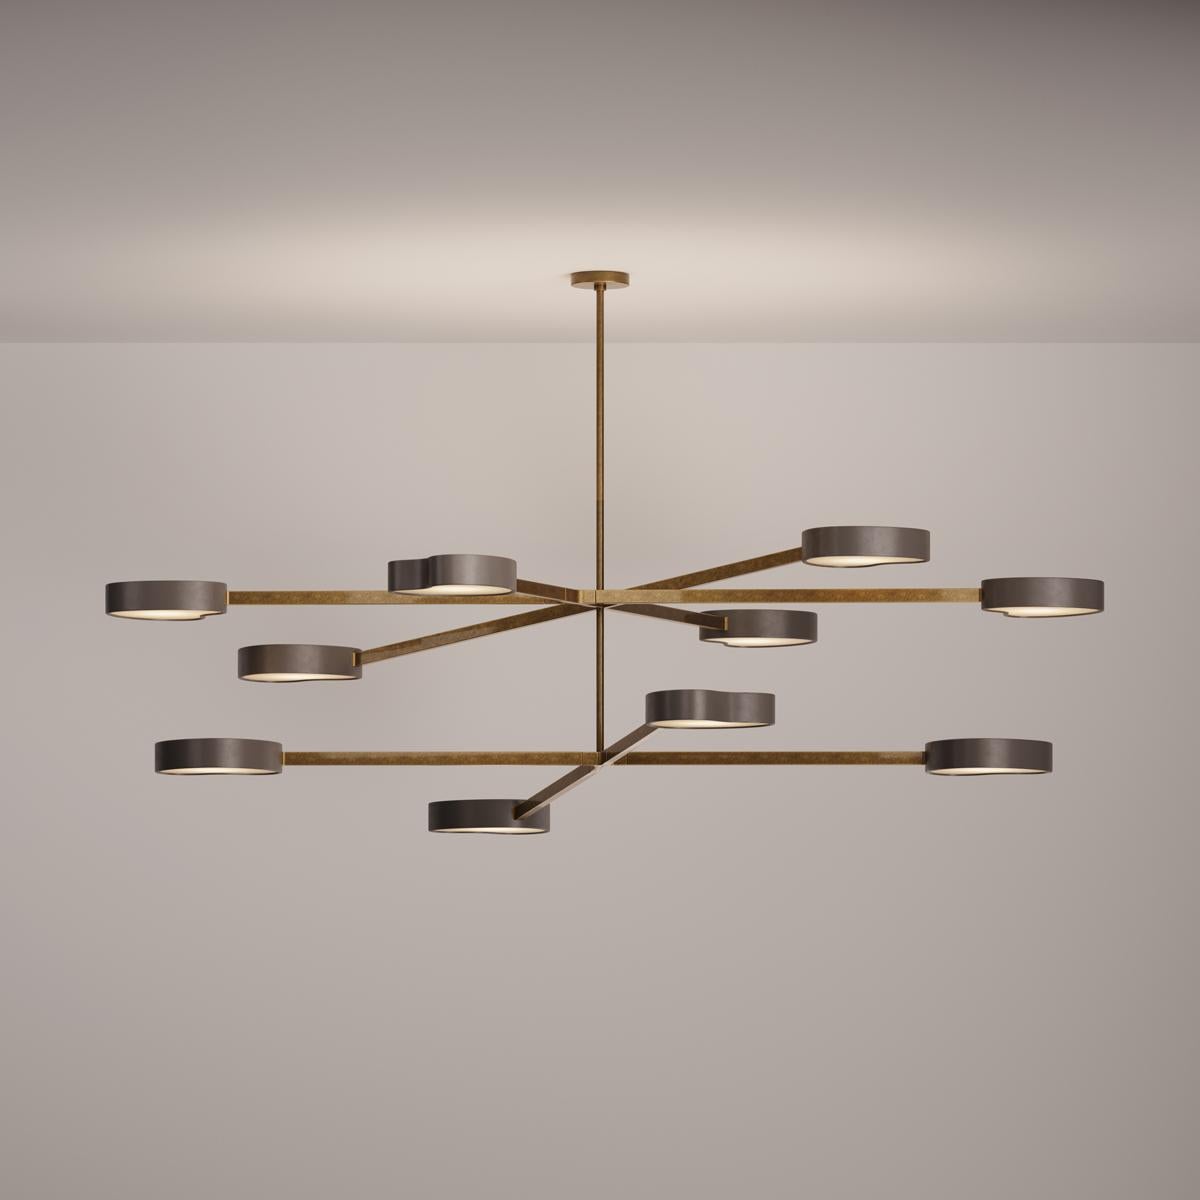 Modern Cuore N.10 Ceiling Light by Gaspare Asaro. Peltro and Bronze Finish For Sale